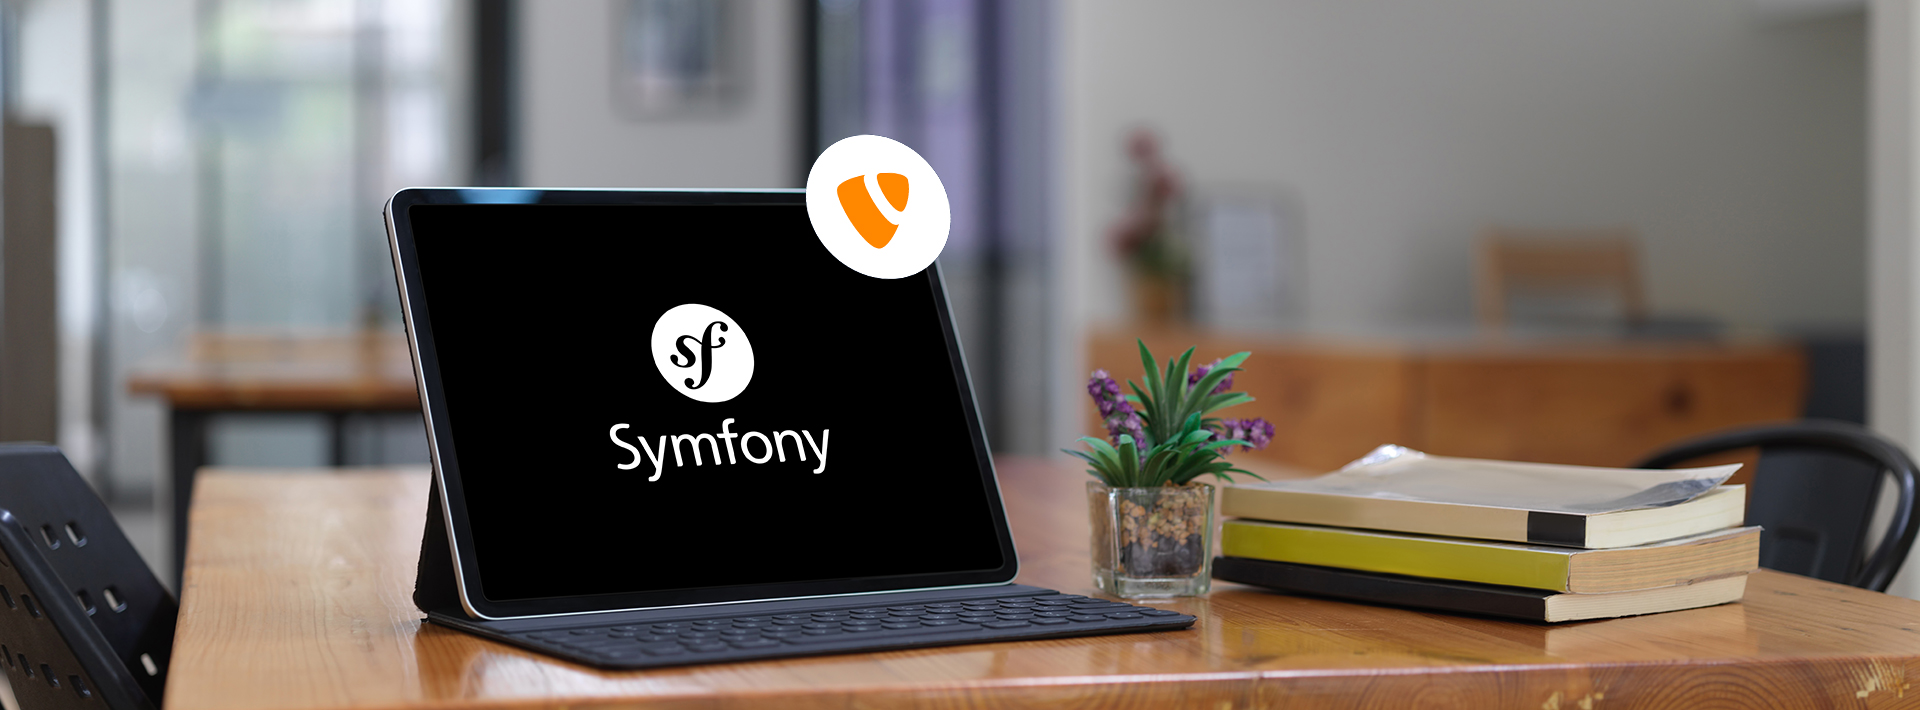 All You Need To Know About TypoScript Conditions With Symfony ExpressionLanguage